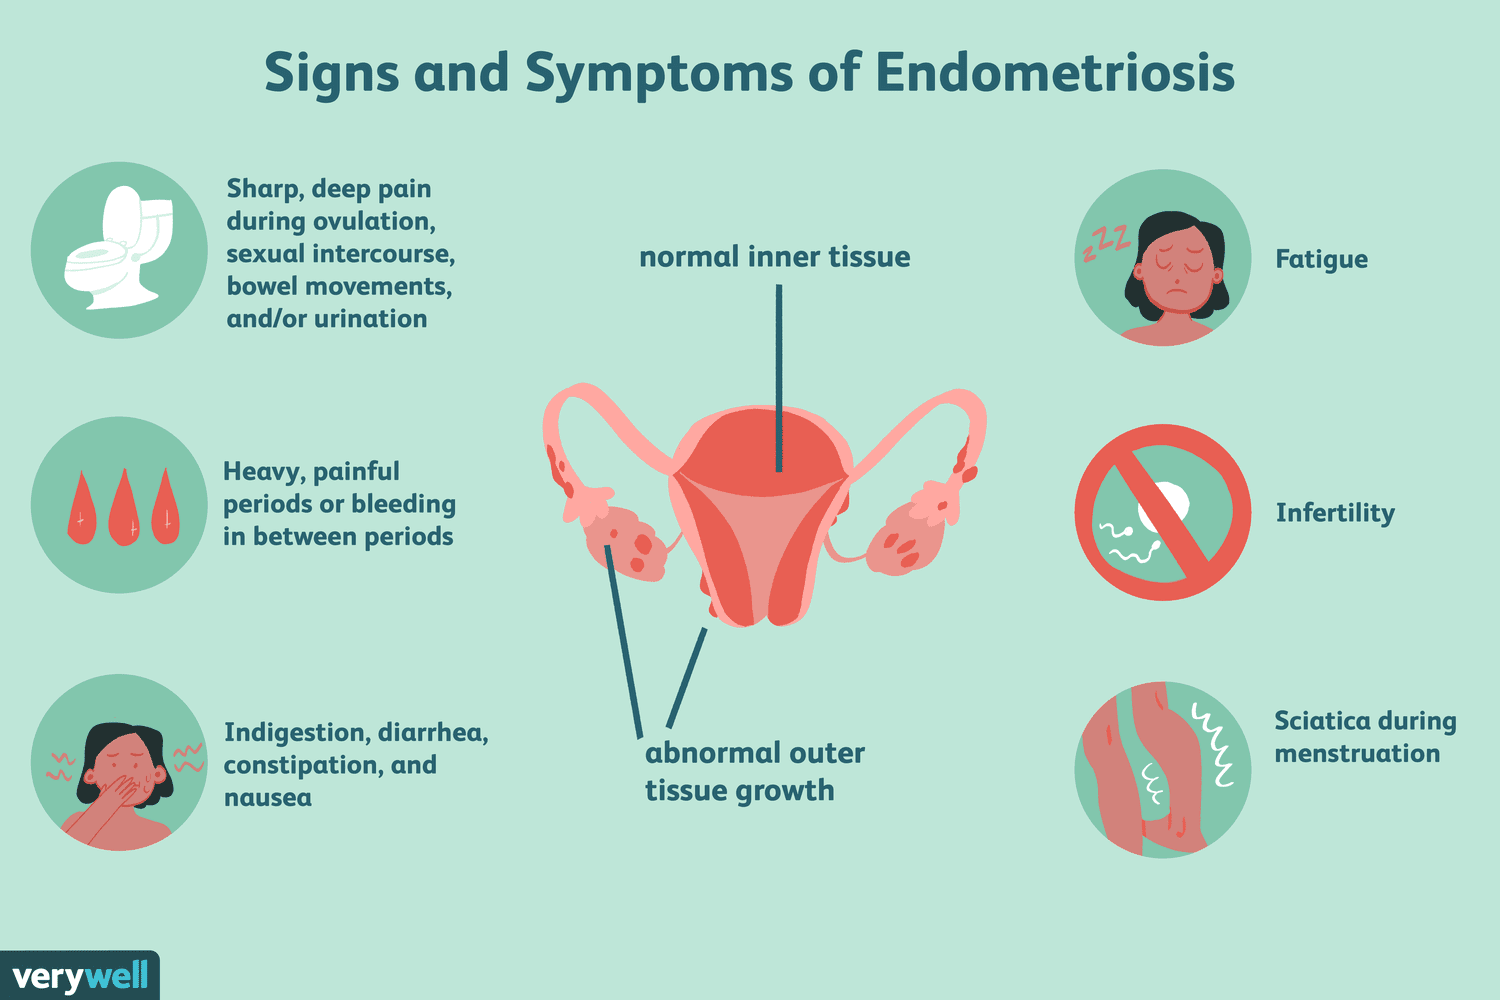 5 Common Root Causes Of Endometriosis And How To Treat Them